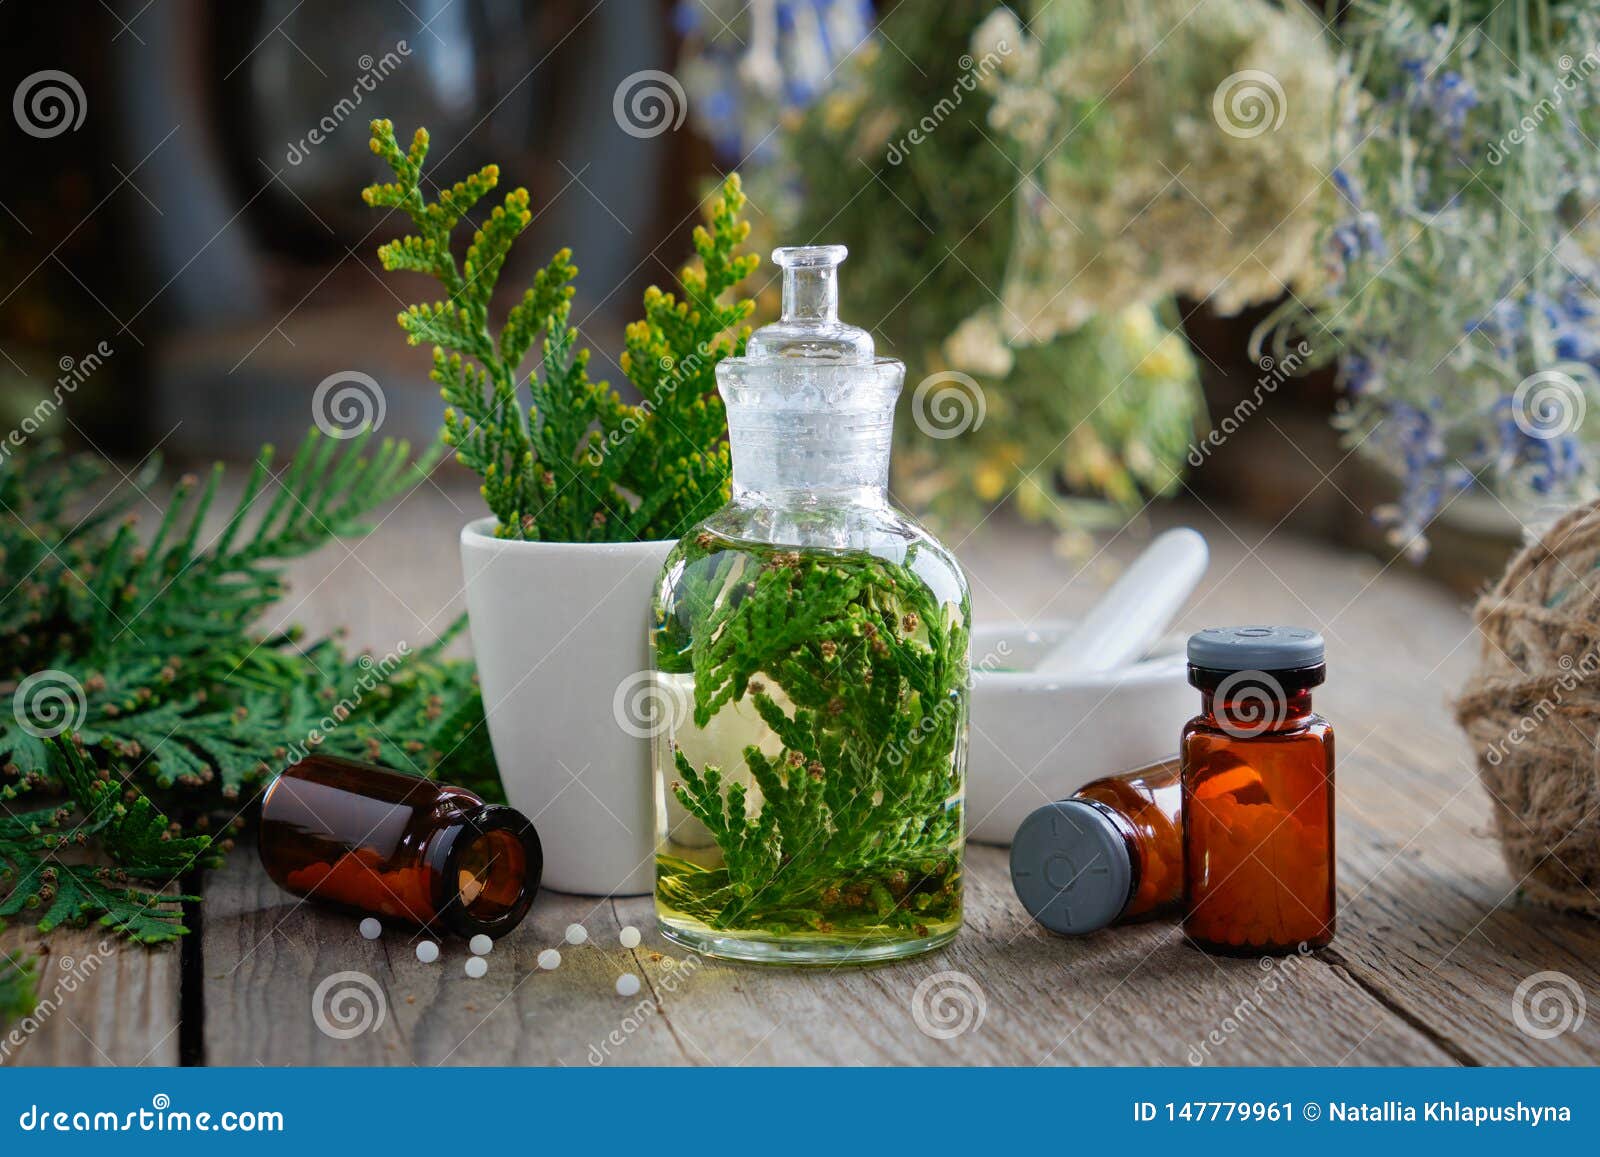 bottles of homeopathic globules, thuja infusion, thuja occidentalis plant and mortar. homeopathy.